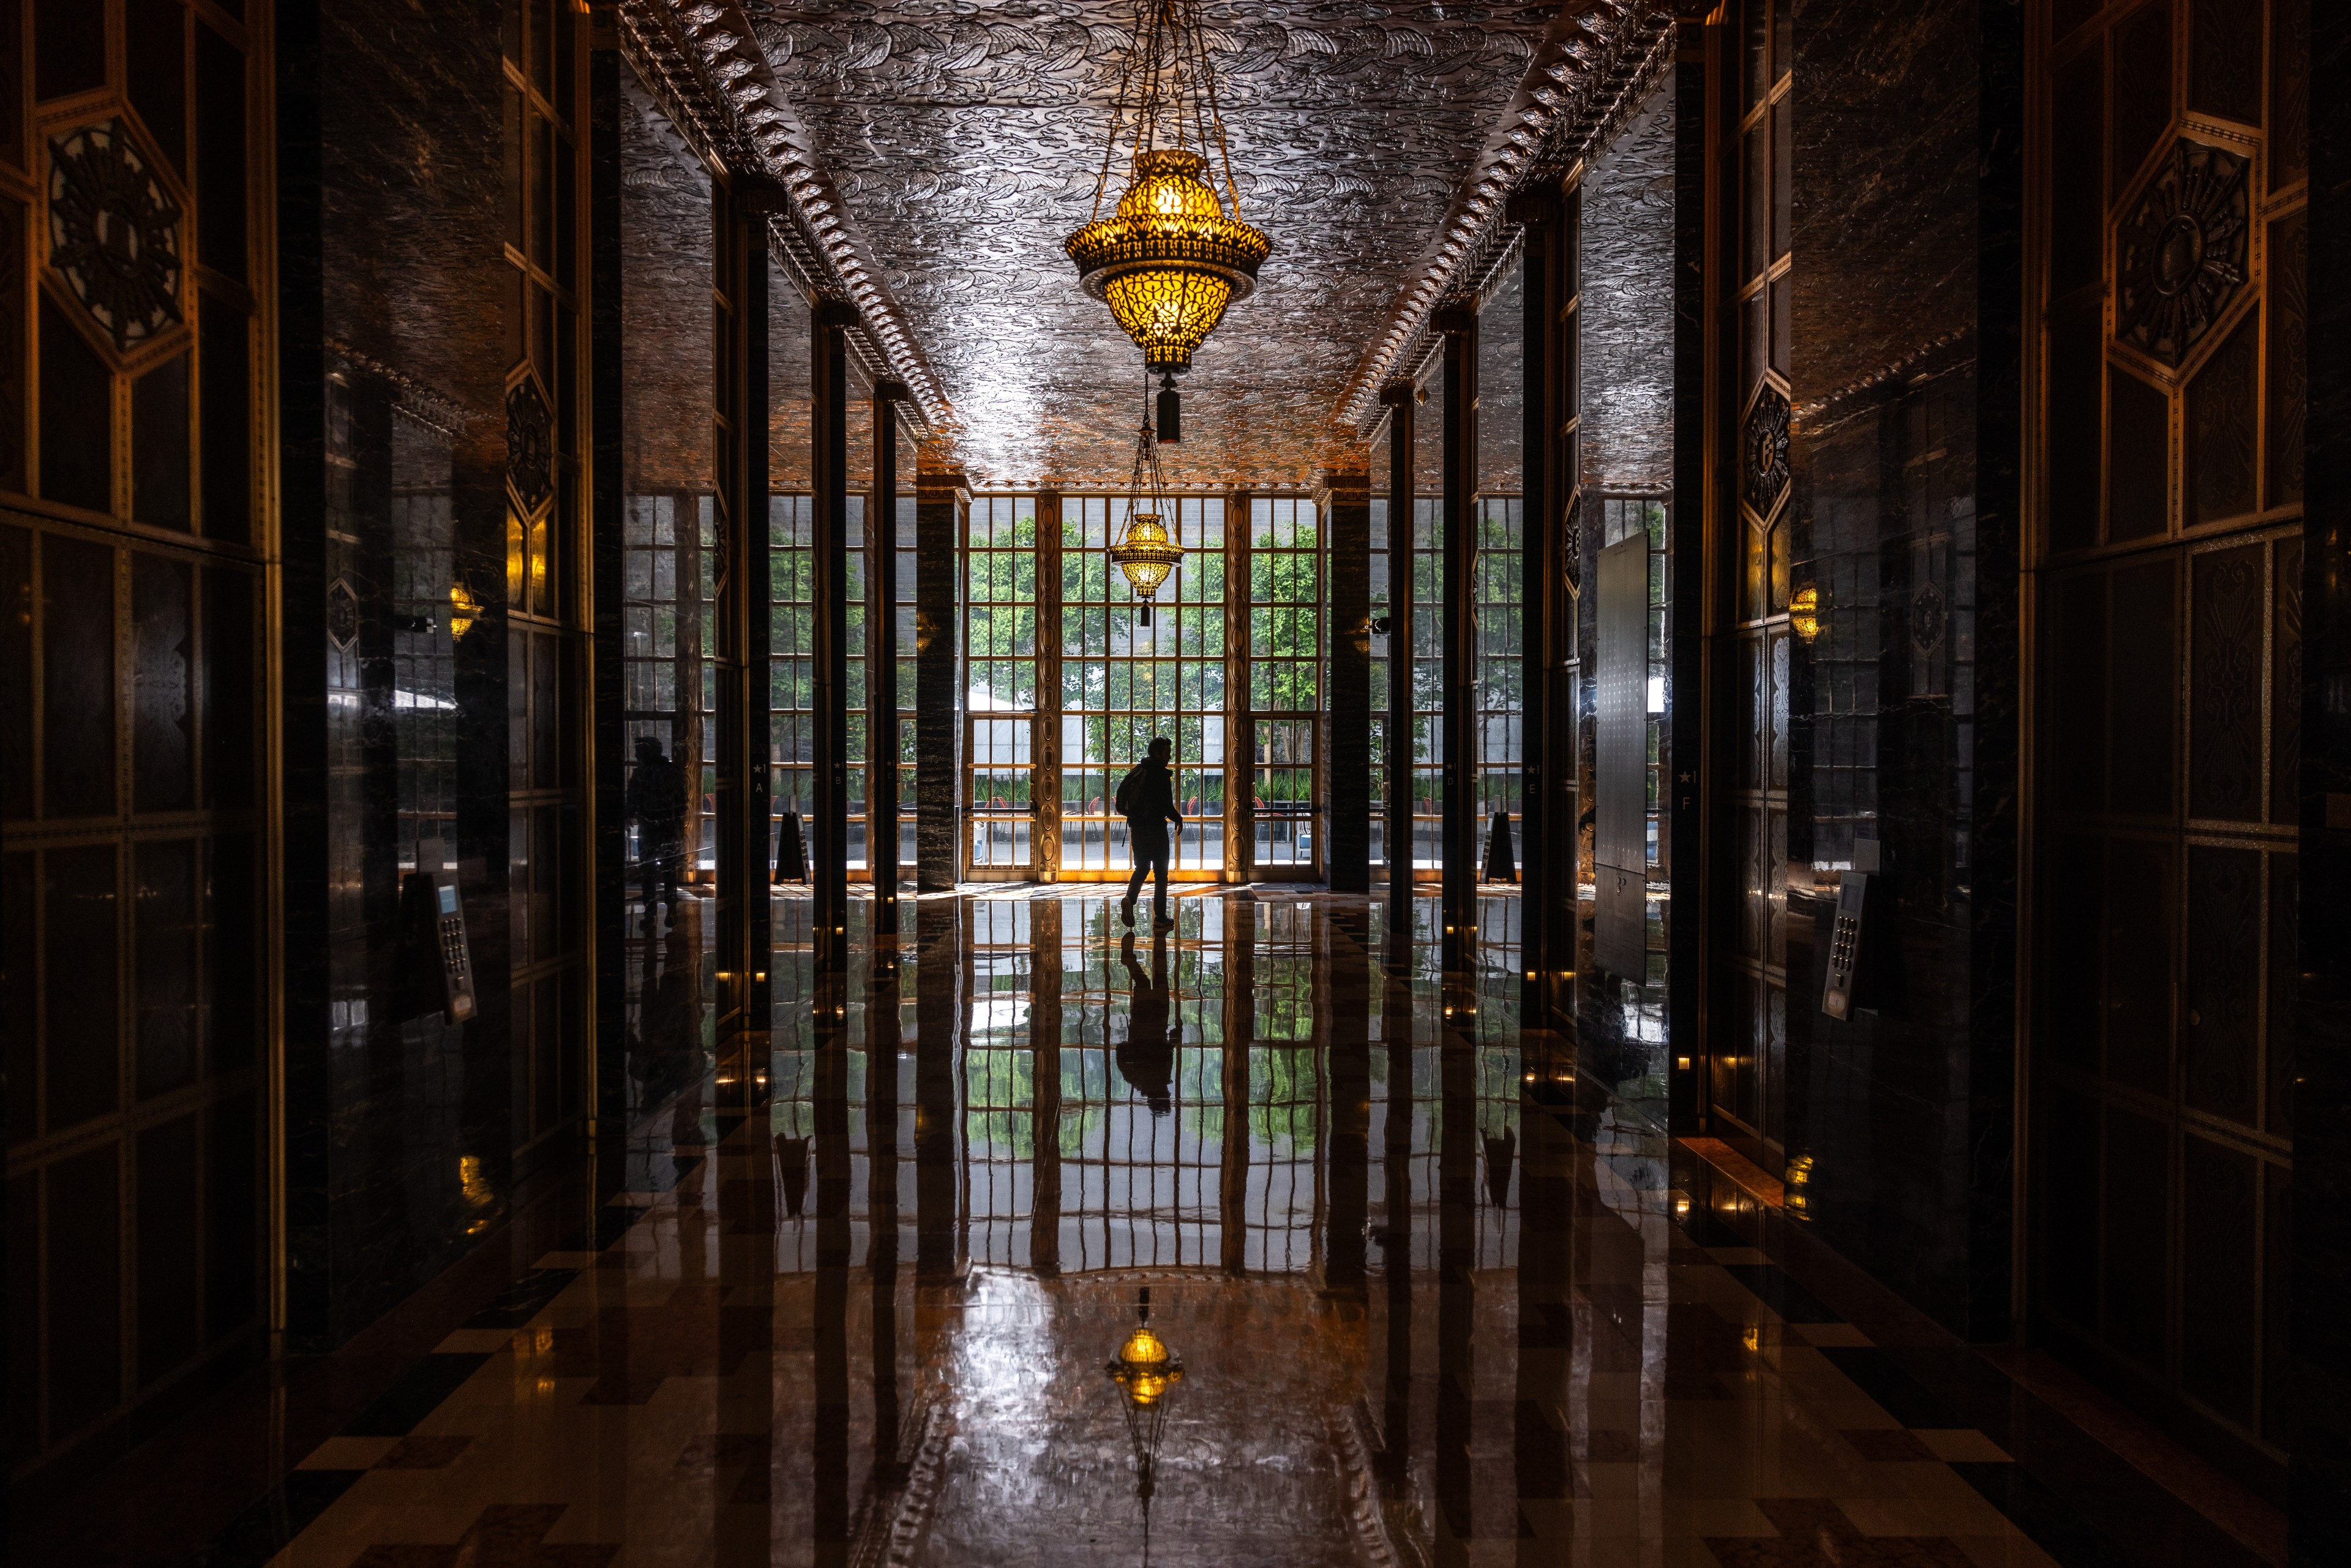 A grand hallway features intricate chandeliers, glossy reflective floors, and large windows at the end, framing a lone figure walking toward the light.